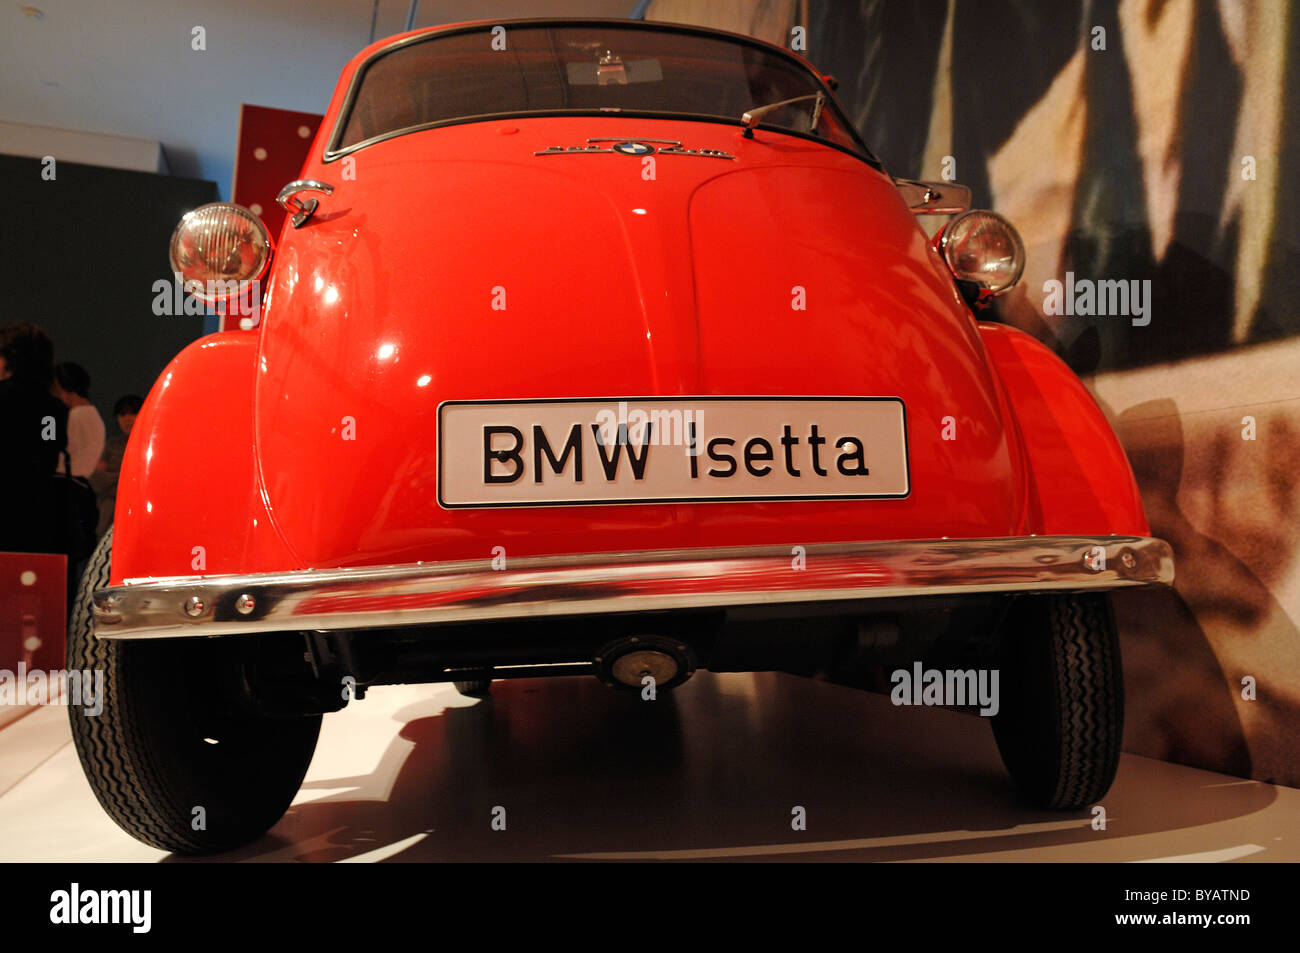 BMW Isetta built between 1955 and 1962, special exhibition Bavaria-Italy 2010, New National Textile and Industrial Museum Stock Photo